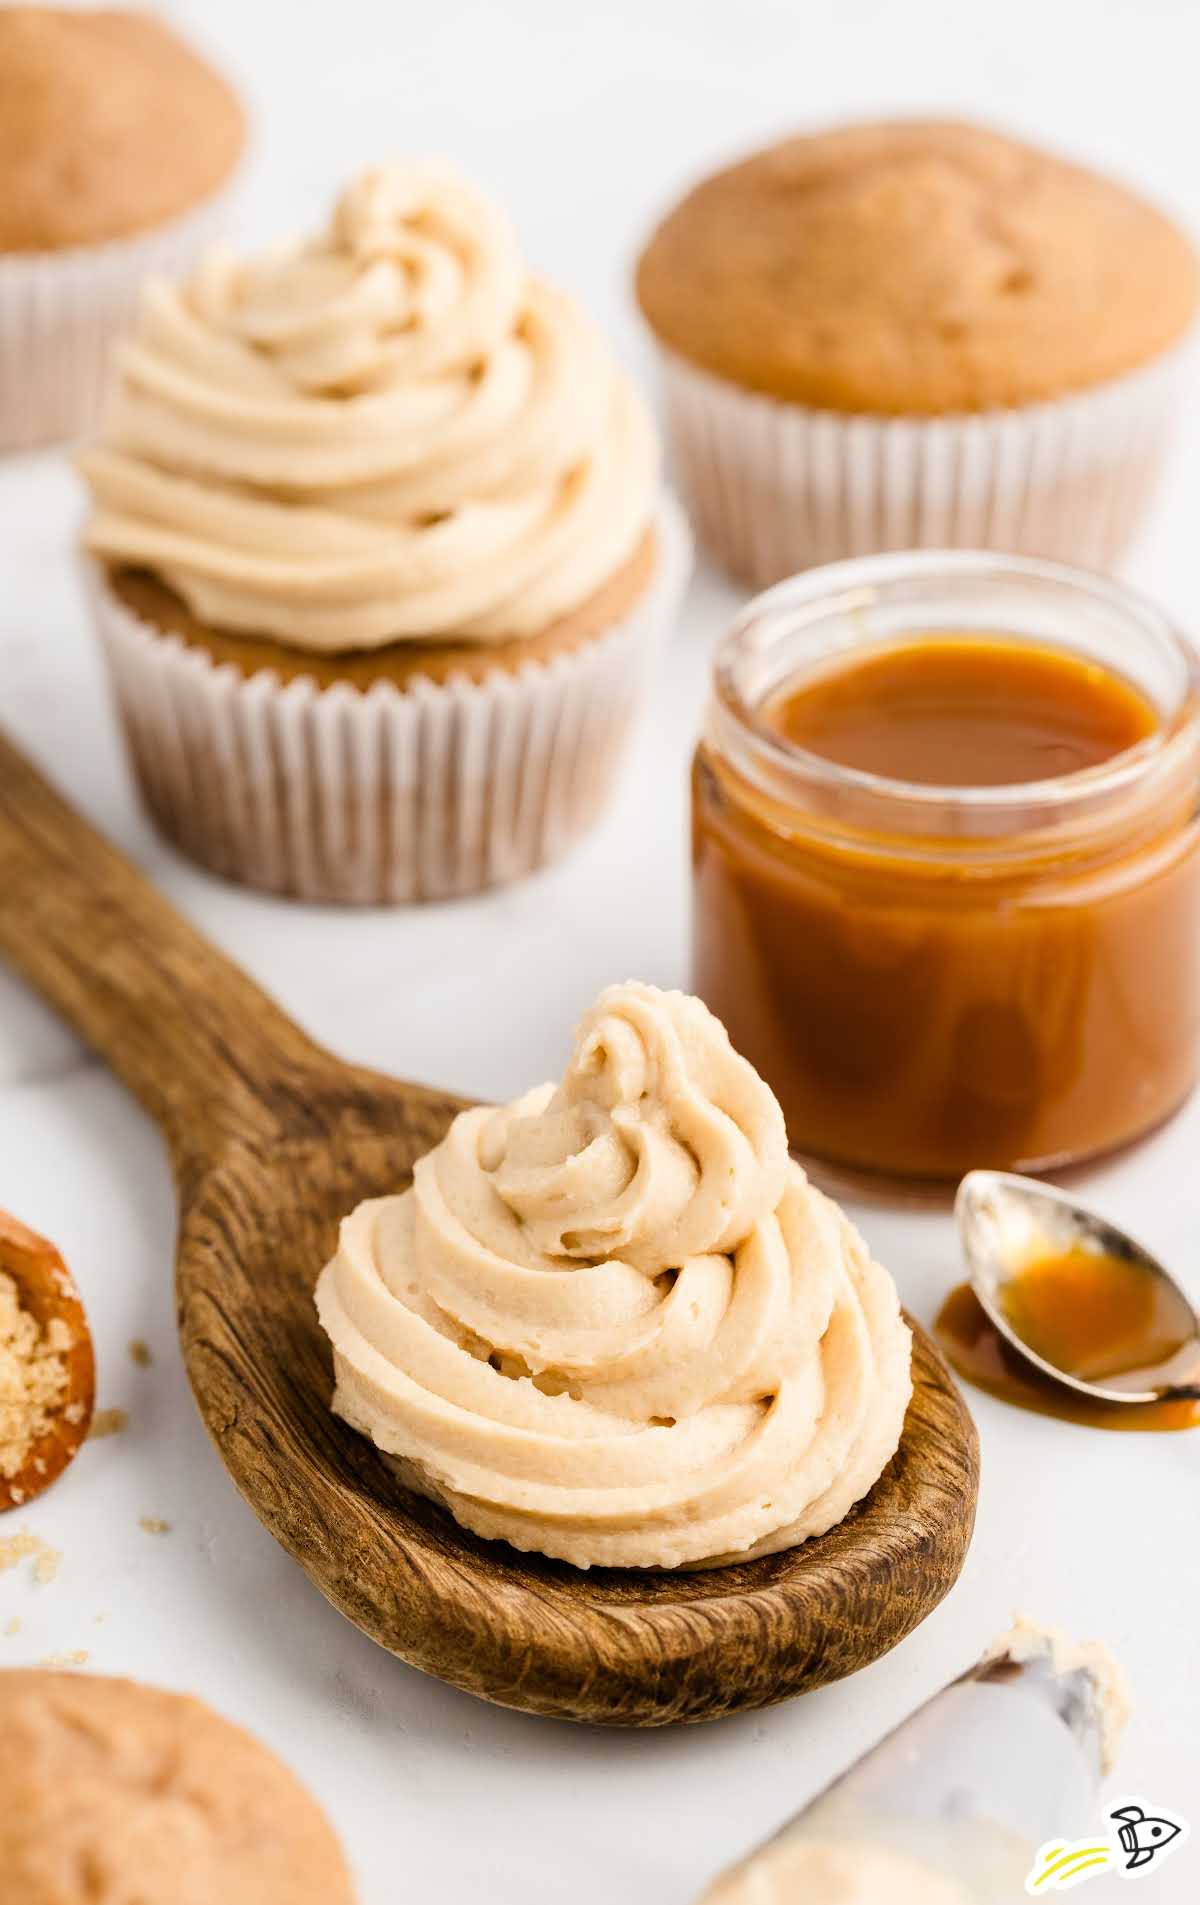 a close up shot of caramel icing on a wooden spoon